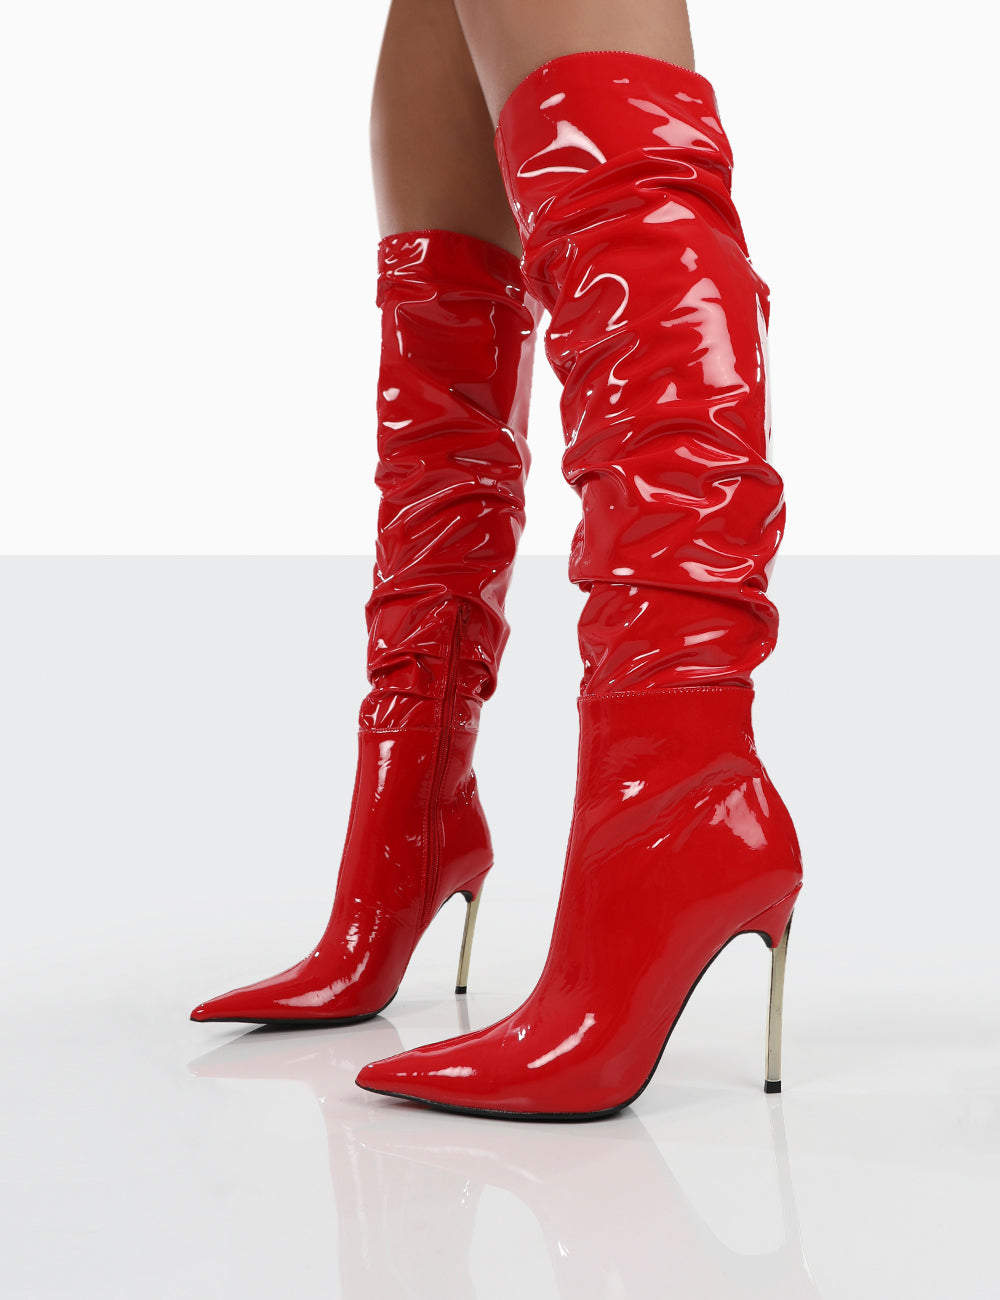 Patent Leather Red Knee High Boots Runway Fashion Stiletto High Heel Sexy  Pointed Toe Slip On 2022 New Arrivals Fashion Shoes